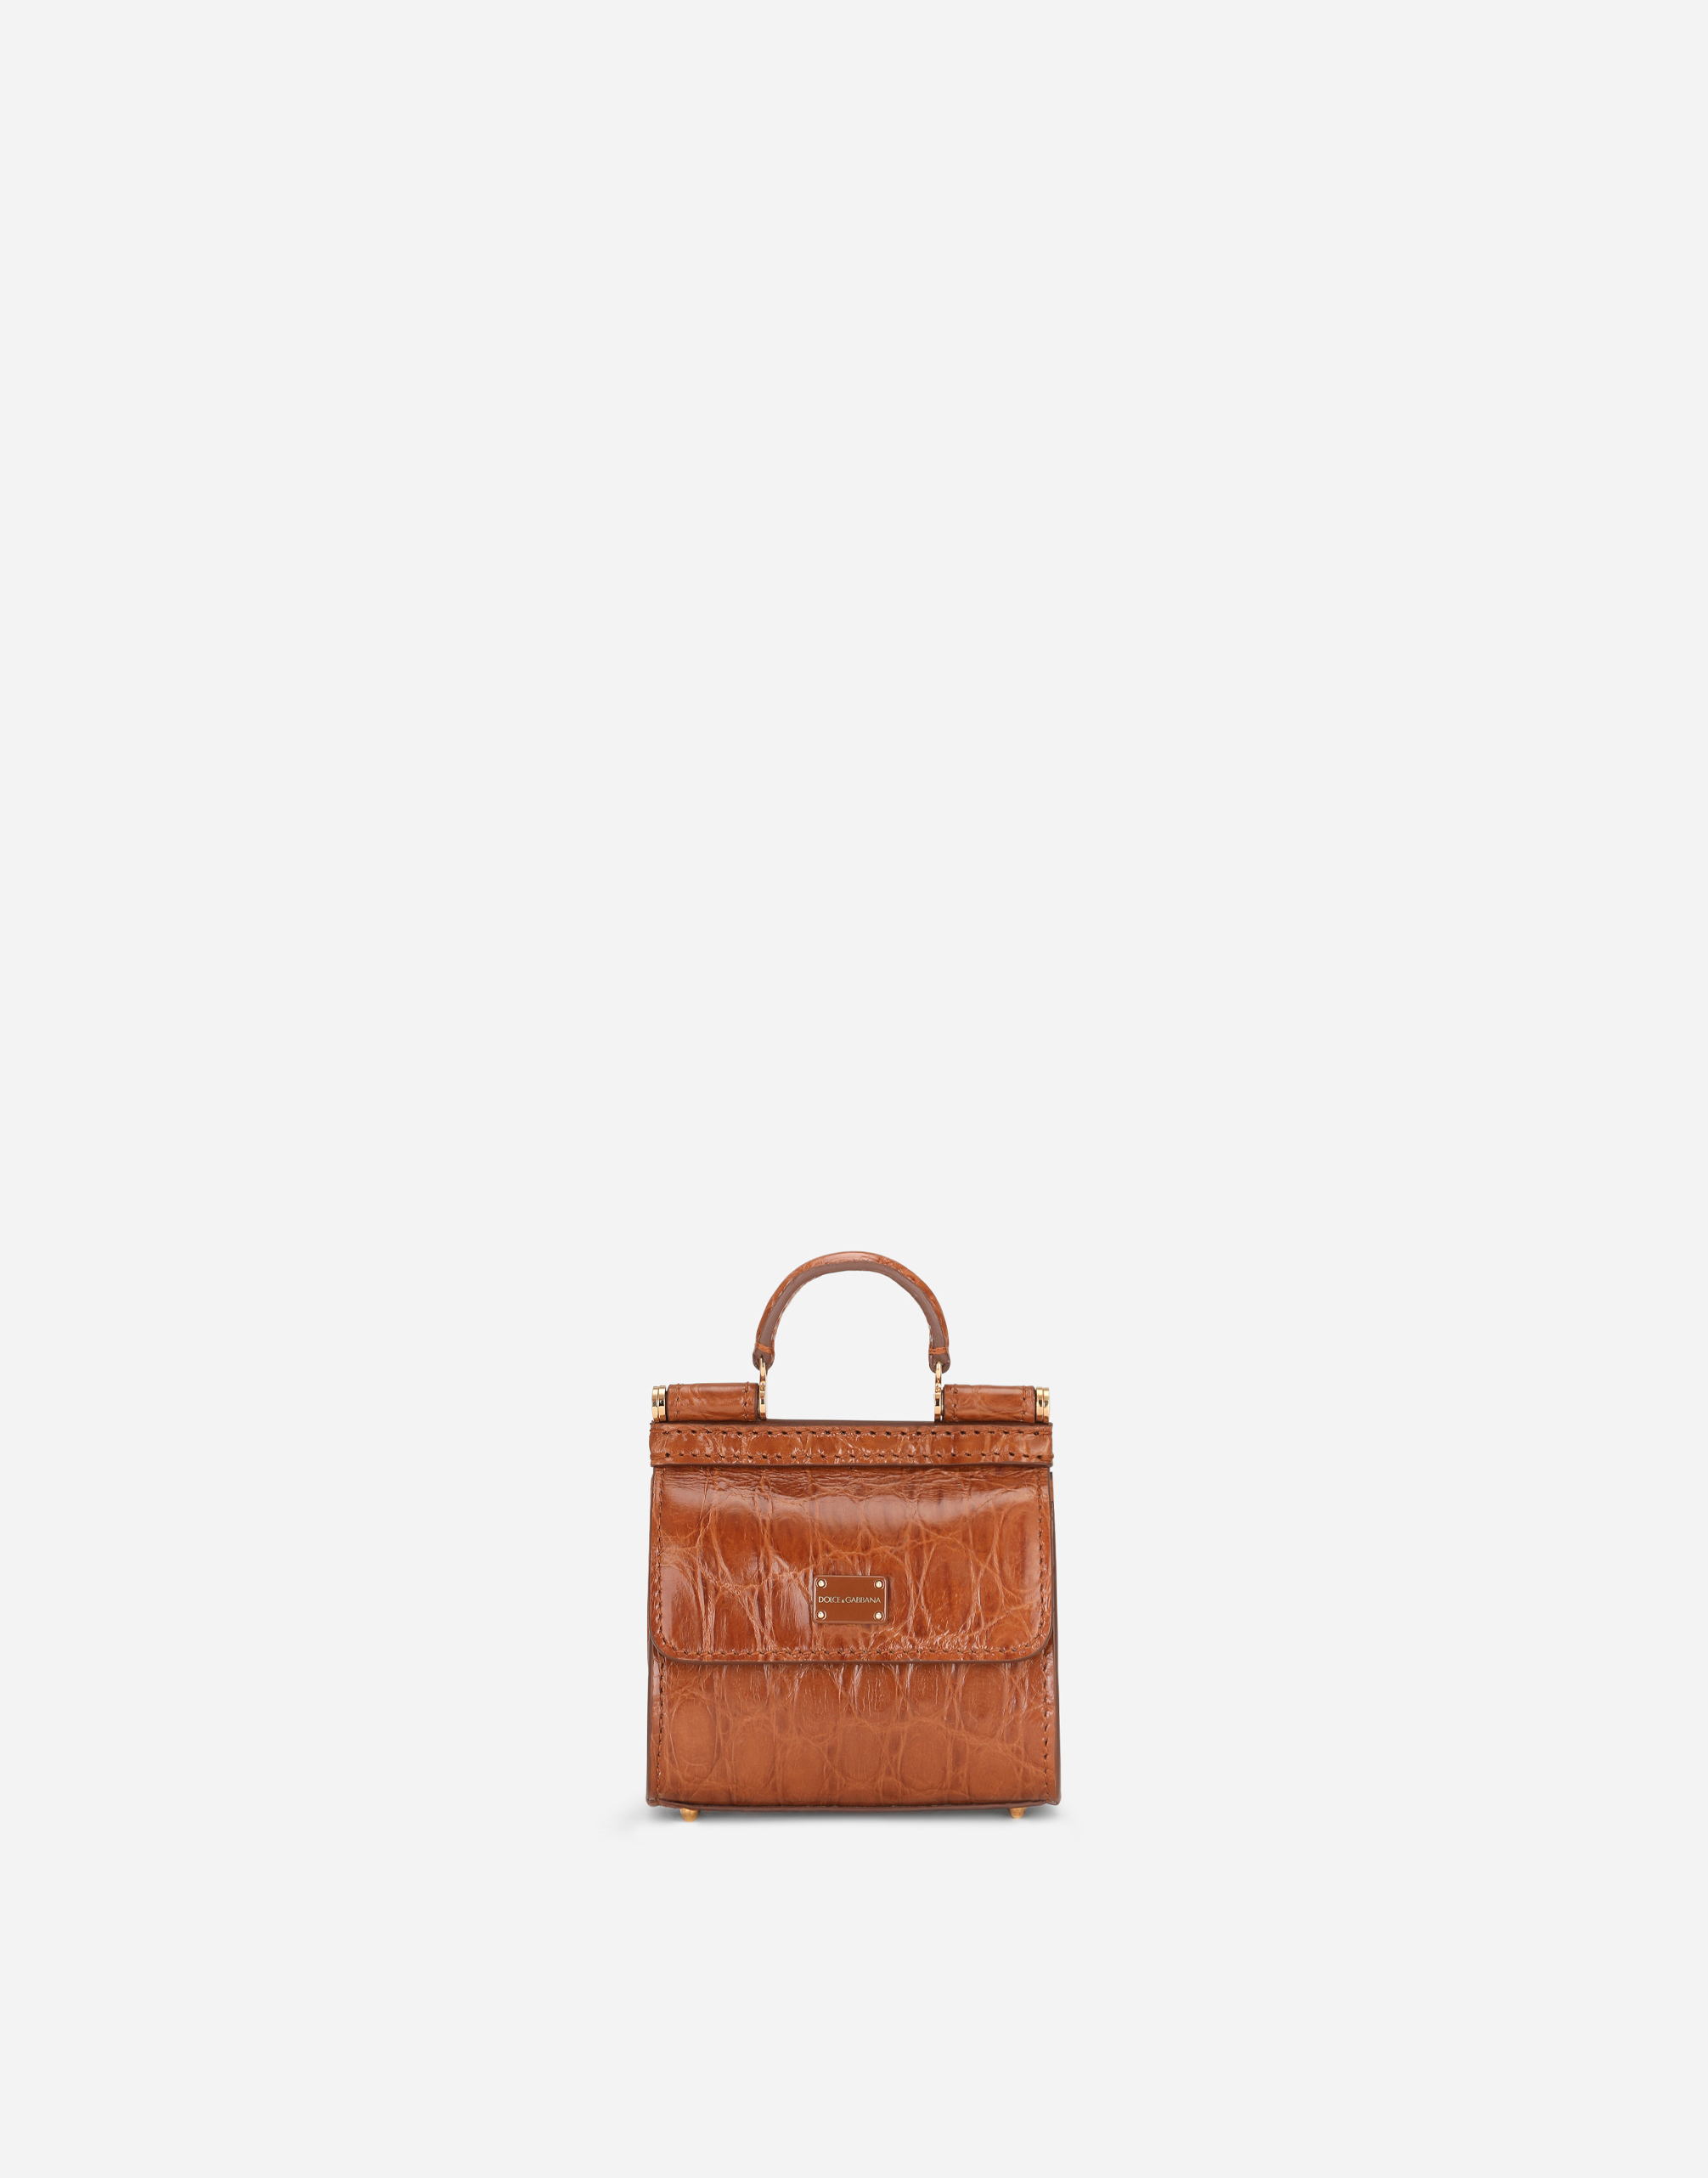 Sicily 58 micro bag in crocodile flank leather in Brown